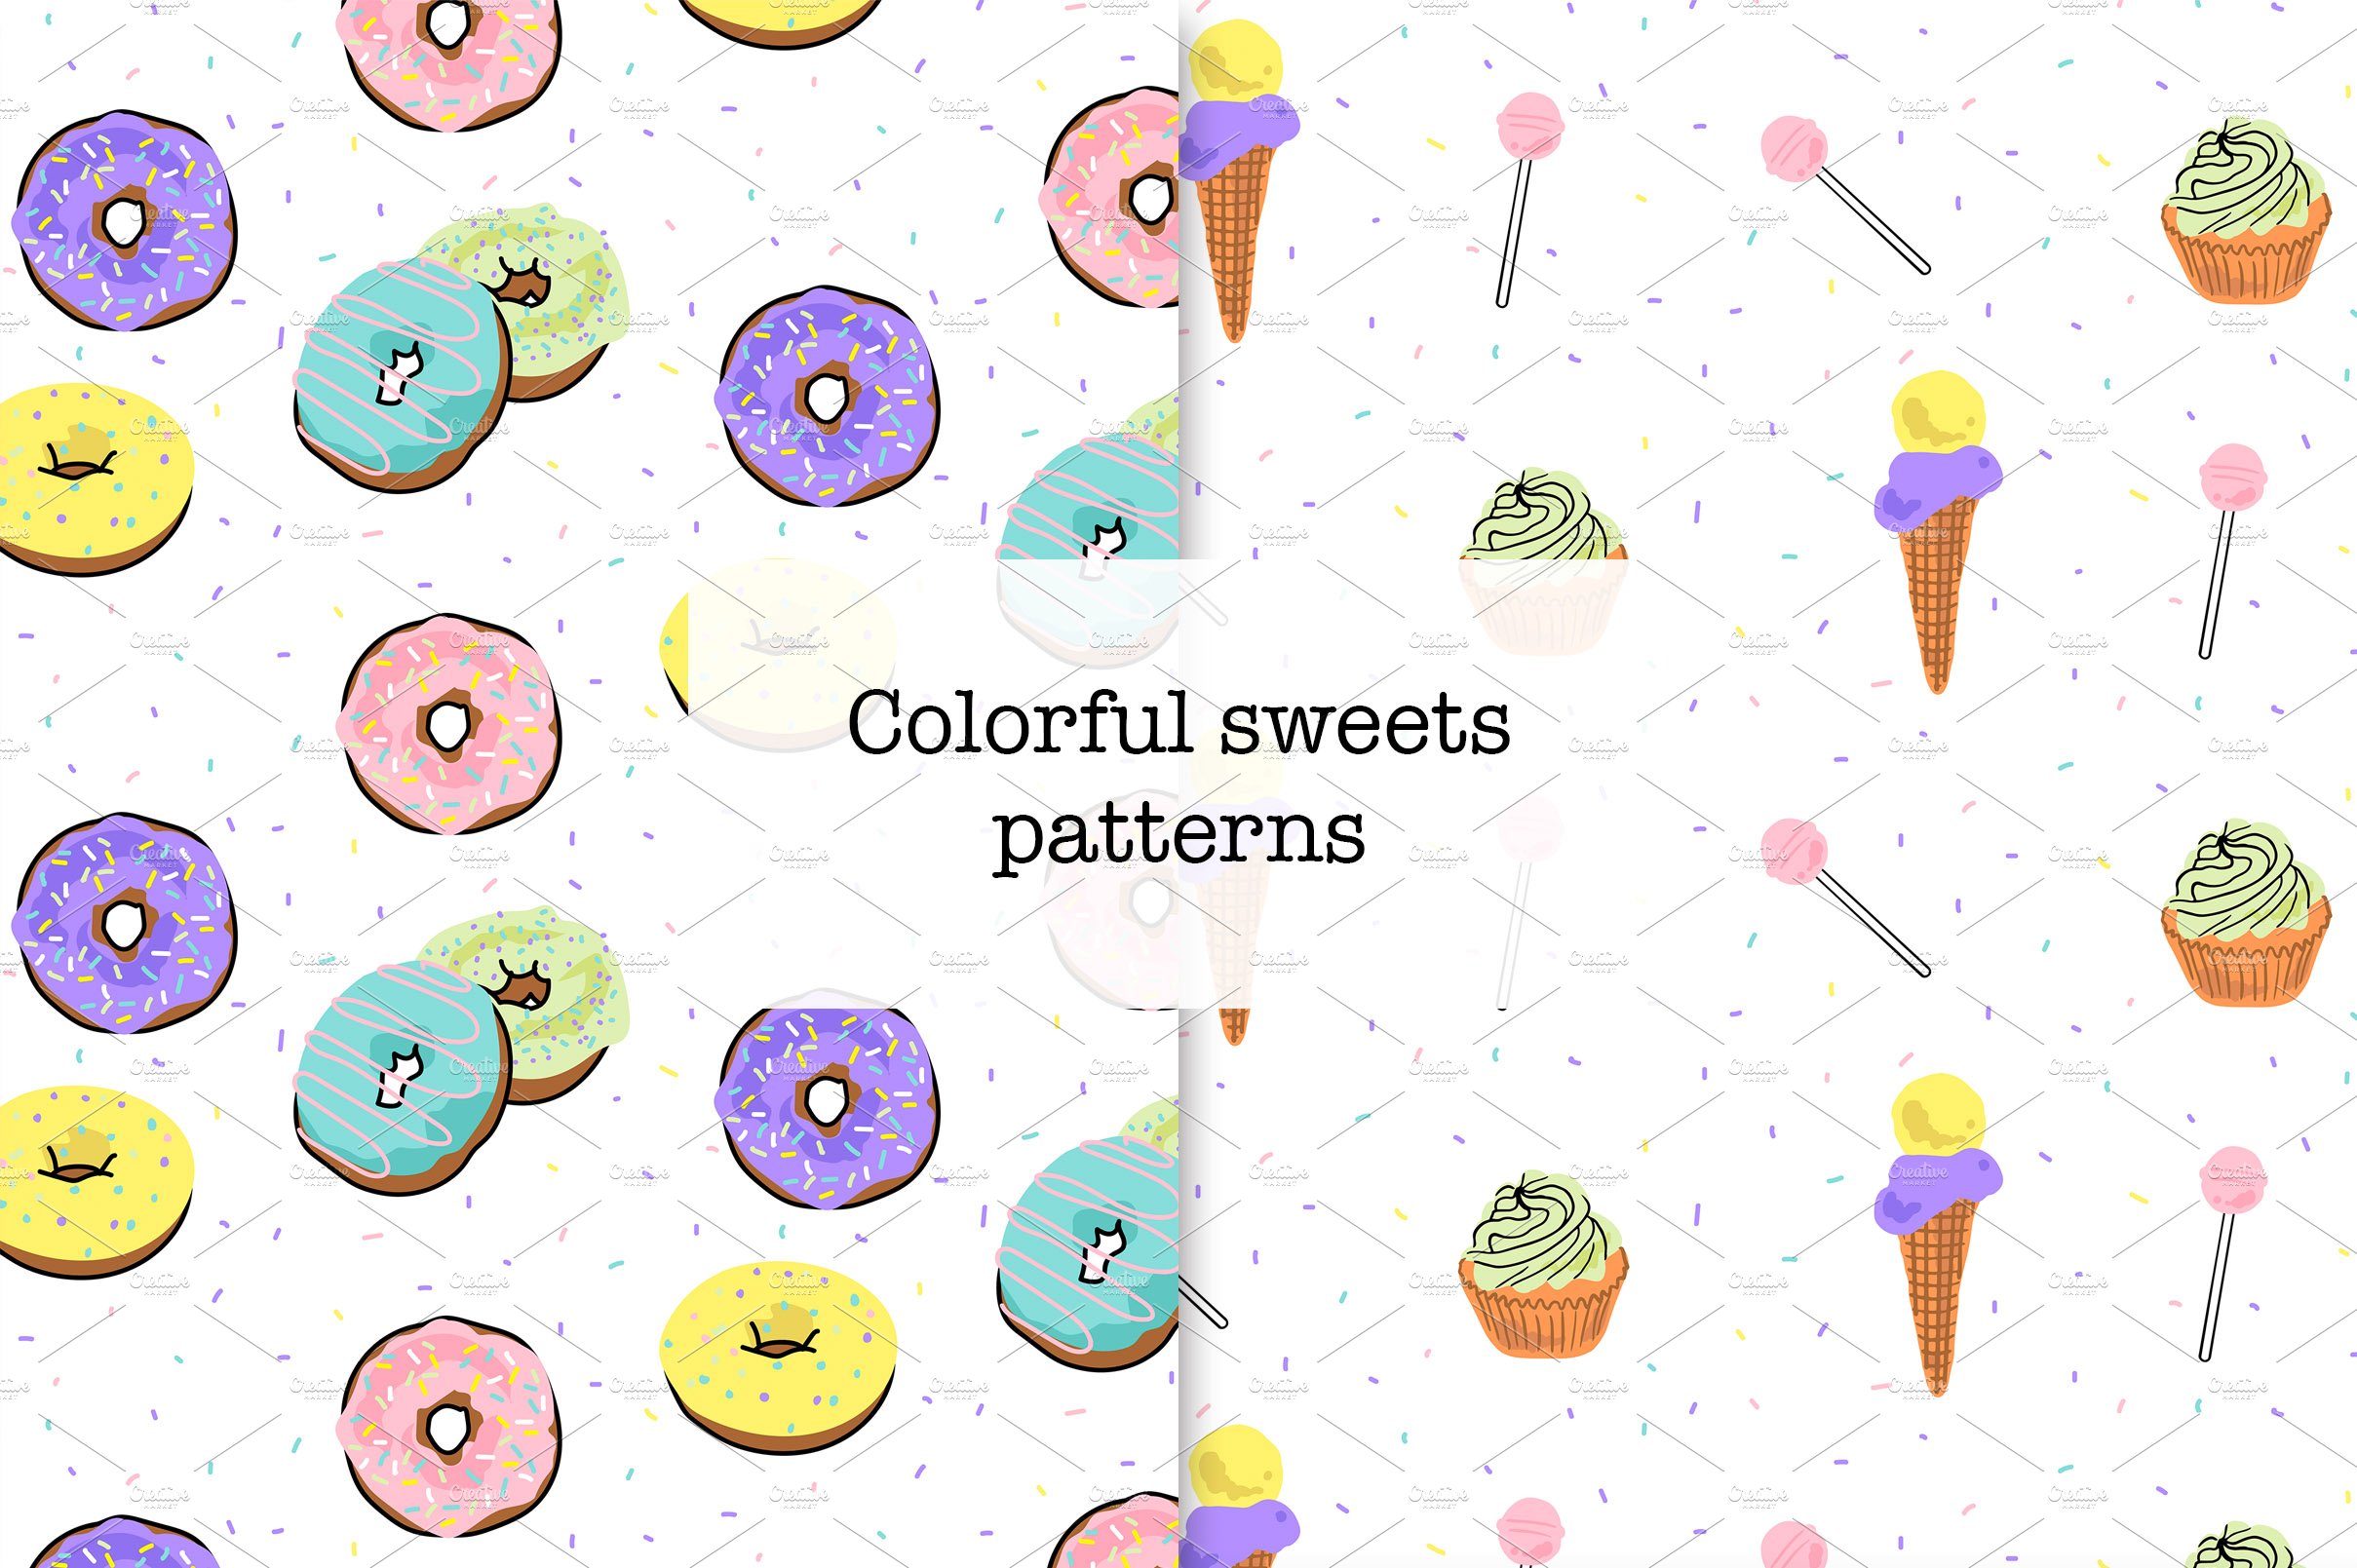 Colorful sweets patterns cover image.